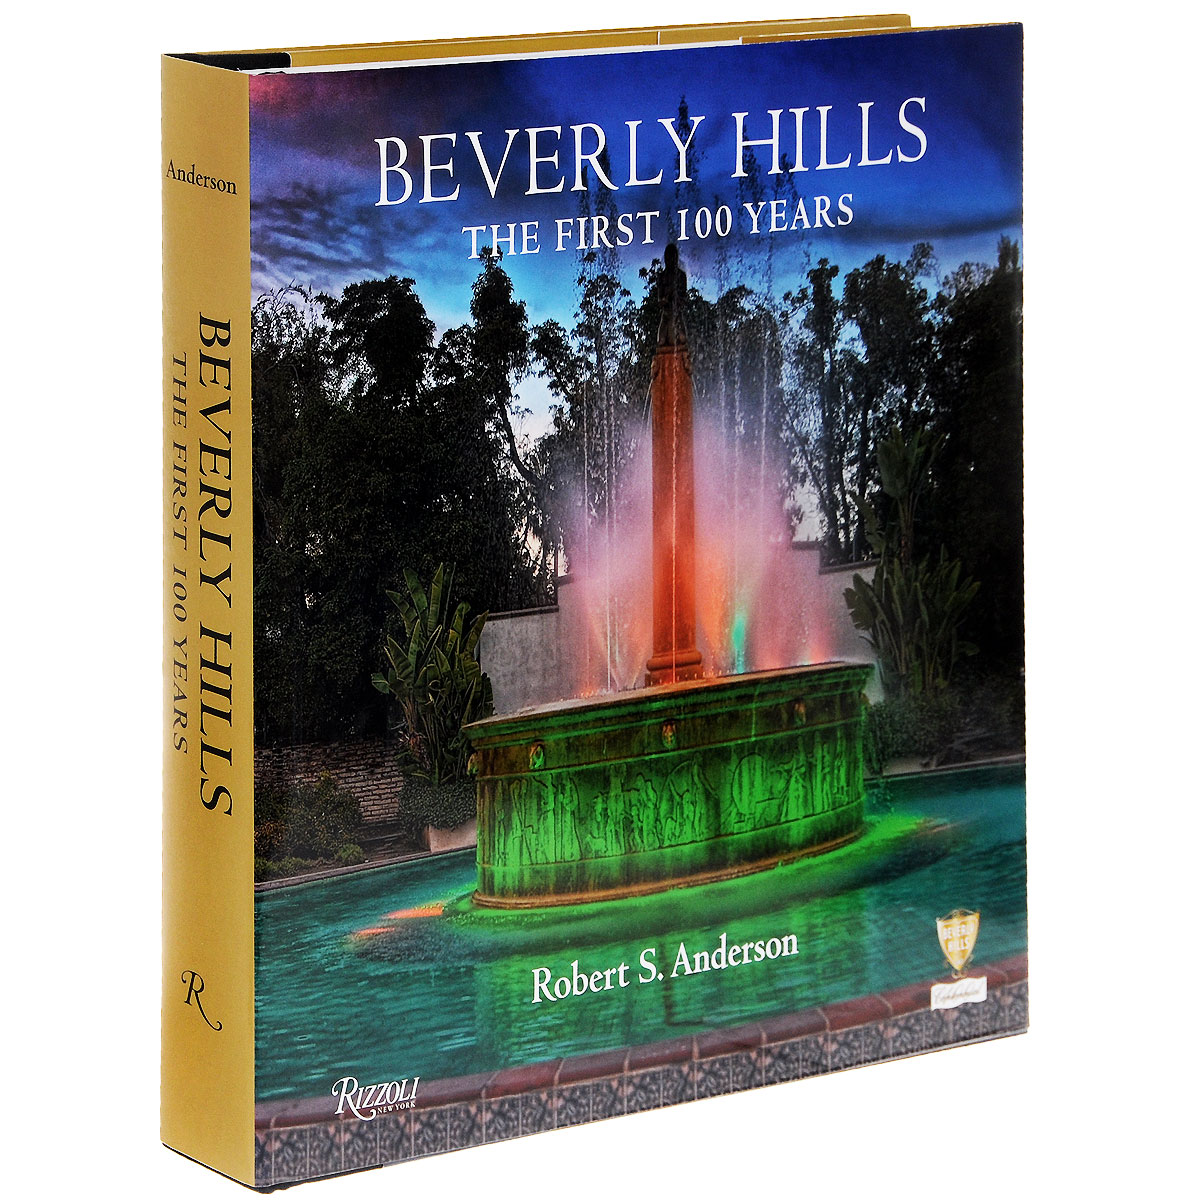 Beverly Hills: The First 100 Years